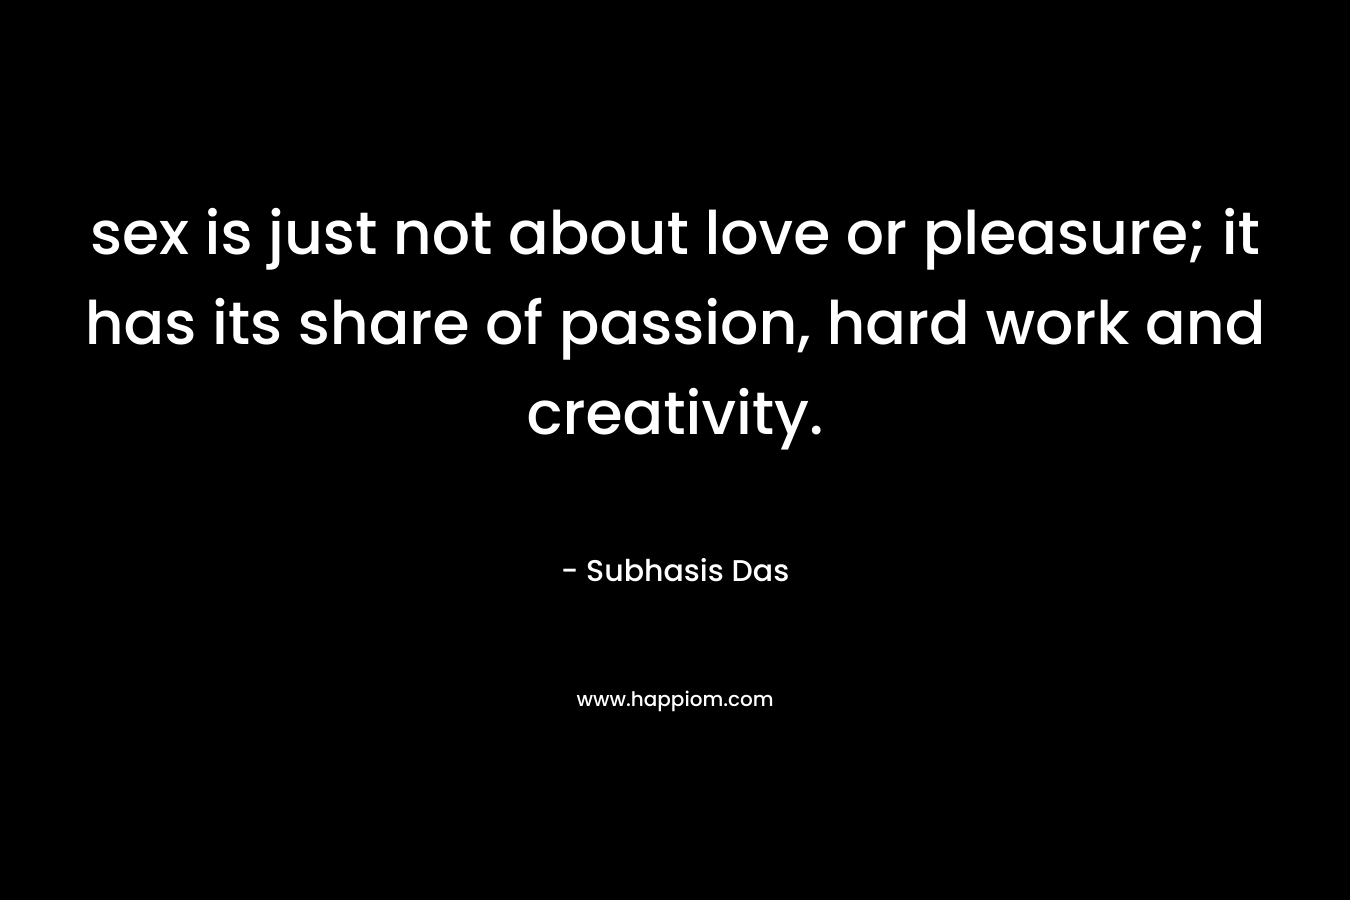 sex is just not about love or pleasure; it has its share of passion, hard work and creativity. – Subhasis Das